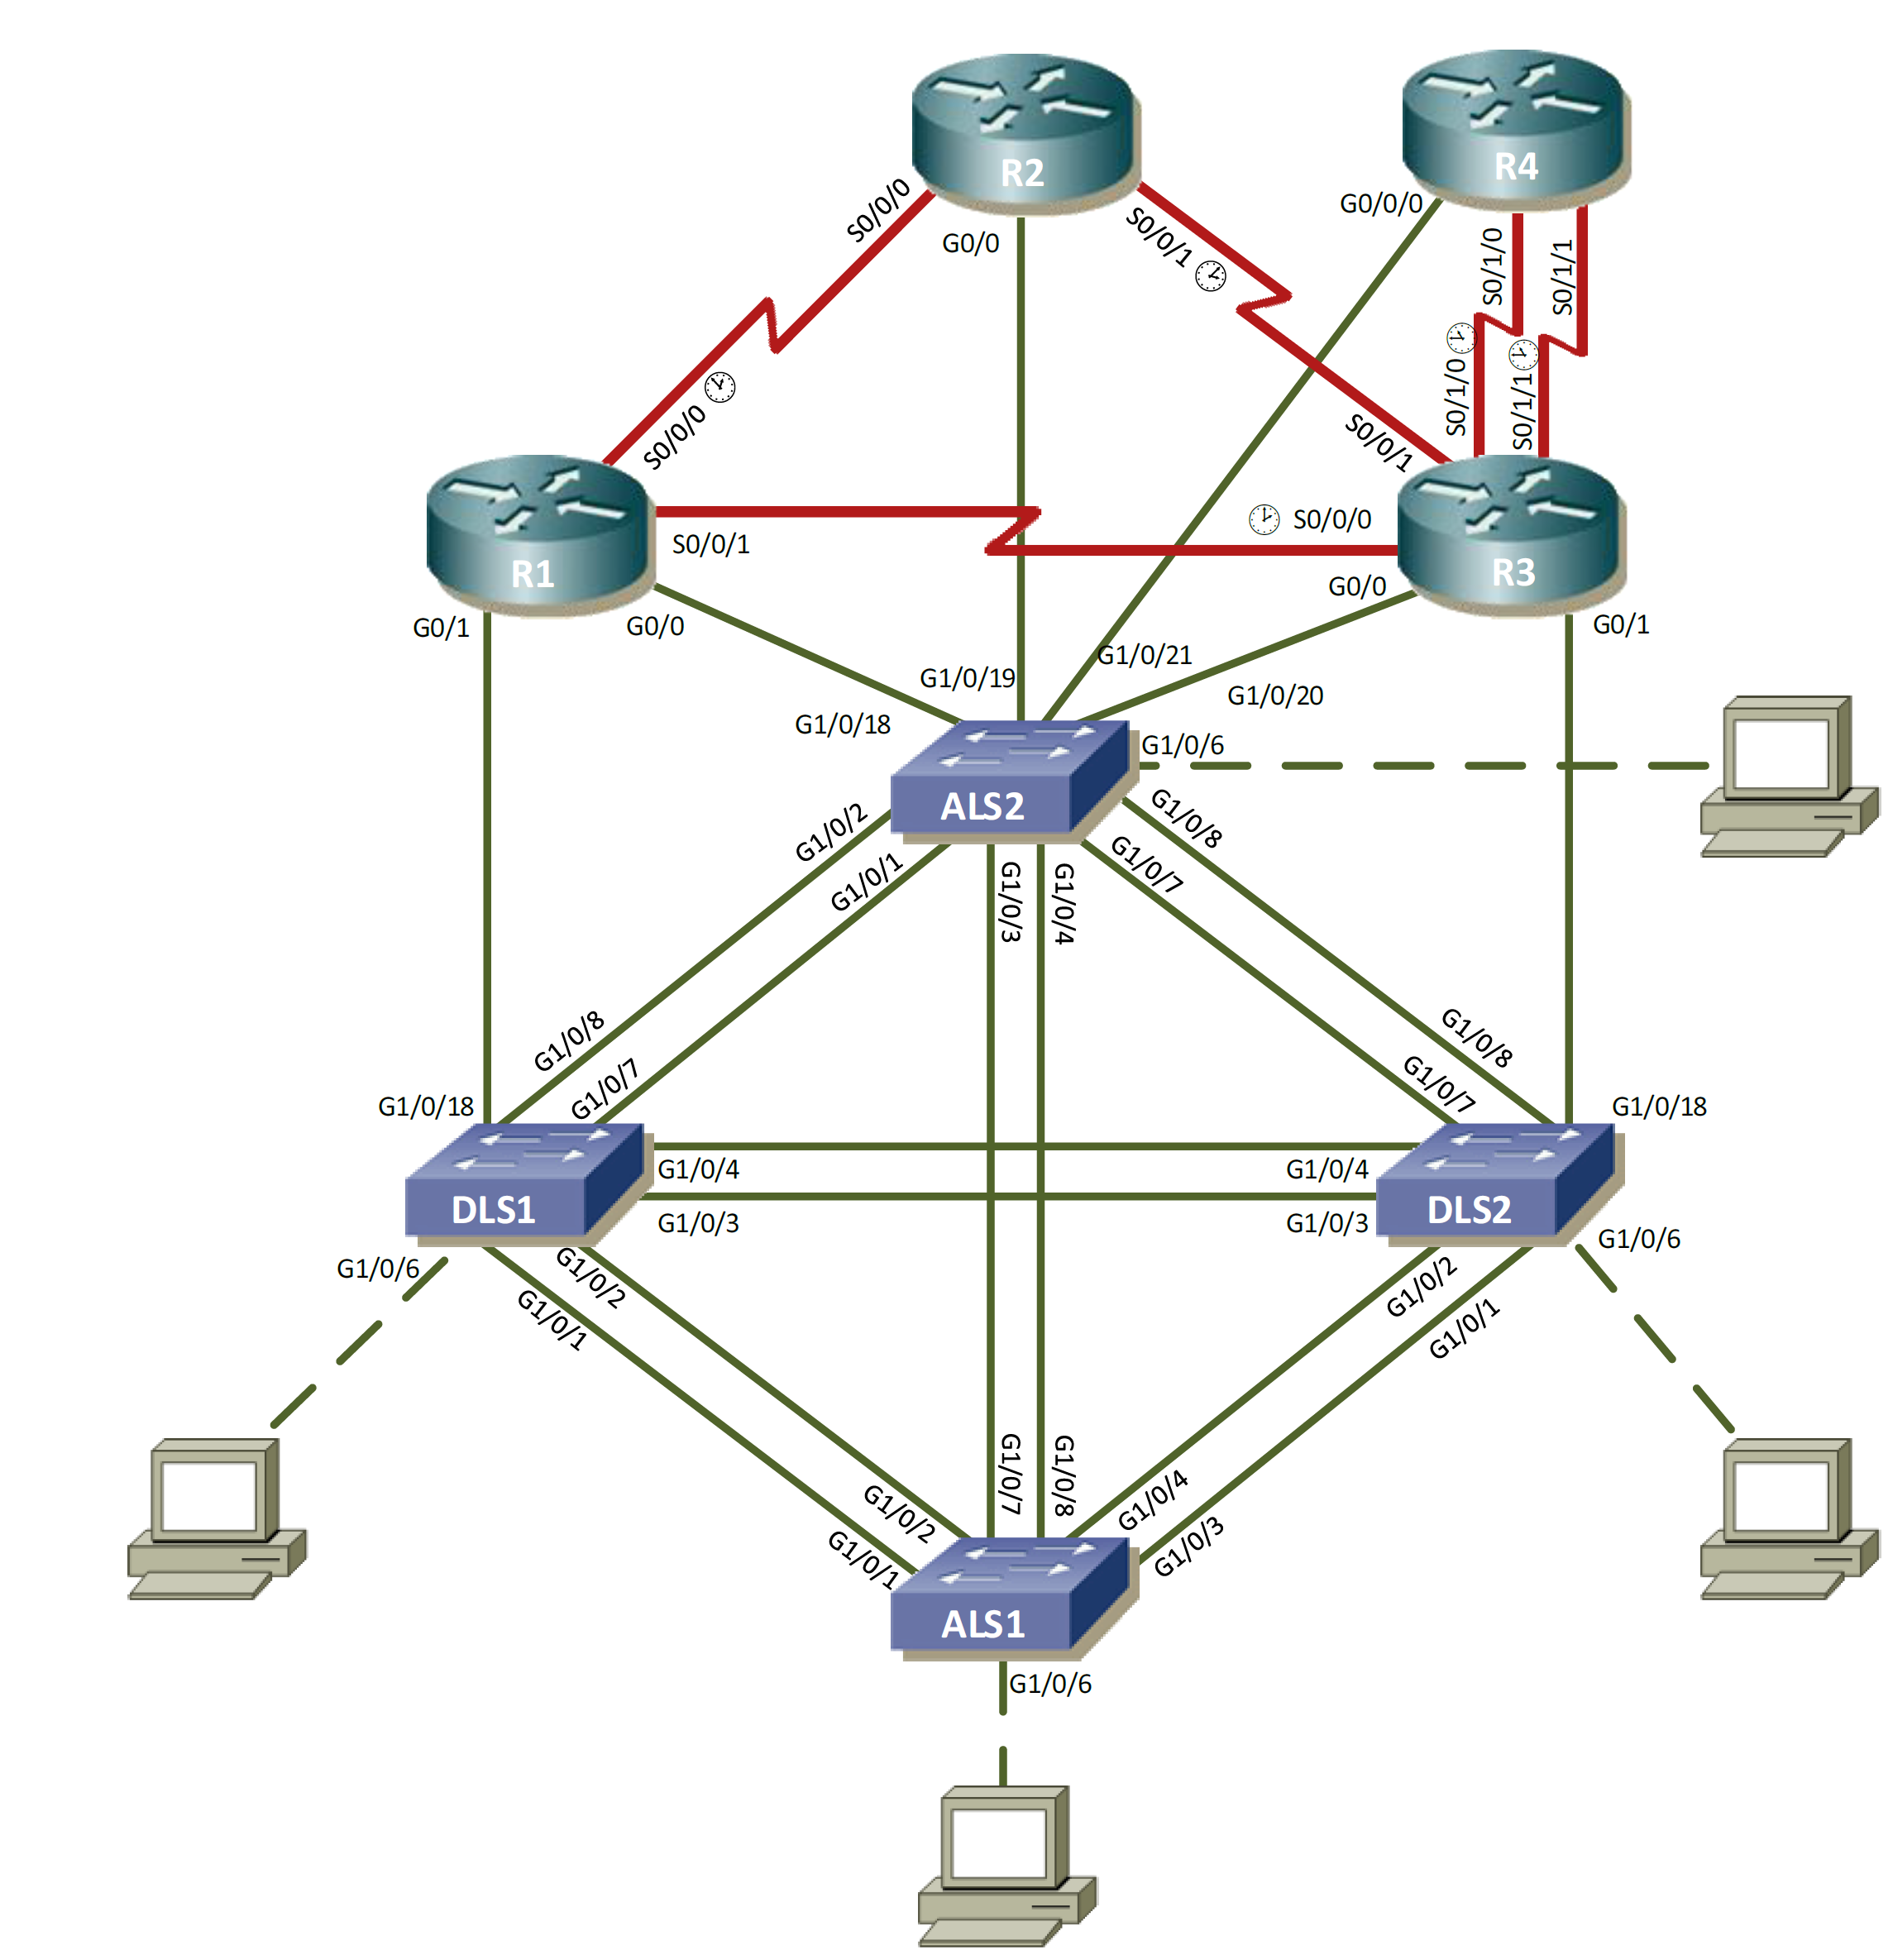 Networking Lab Topology